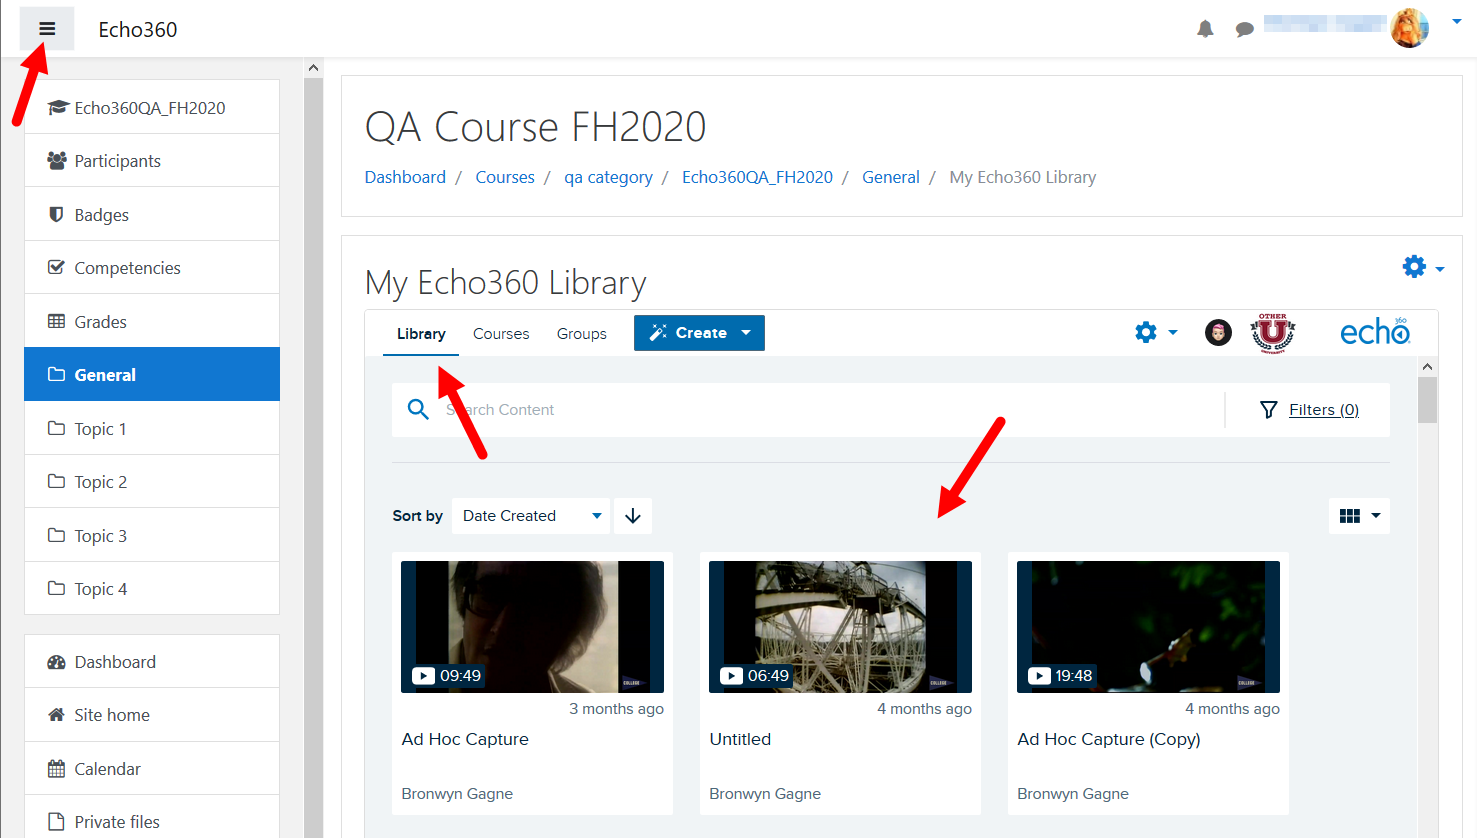 Moodle course page with Echo360 library open in main section of the page as described